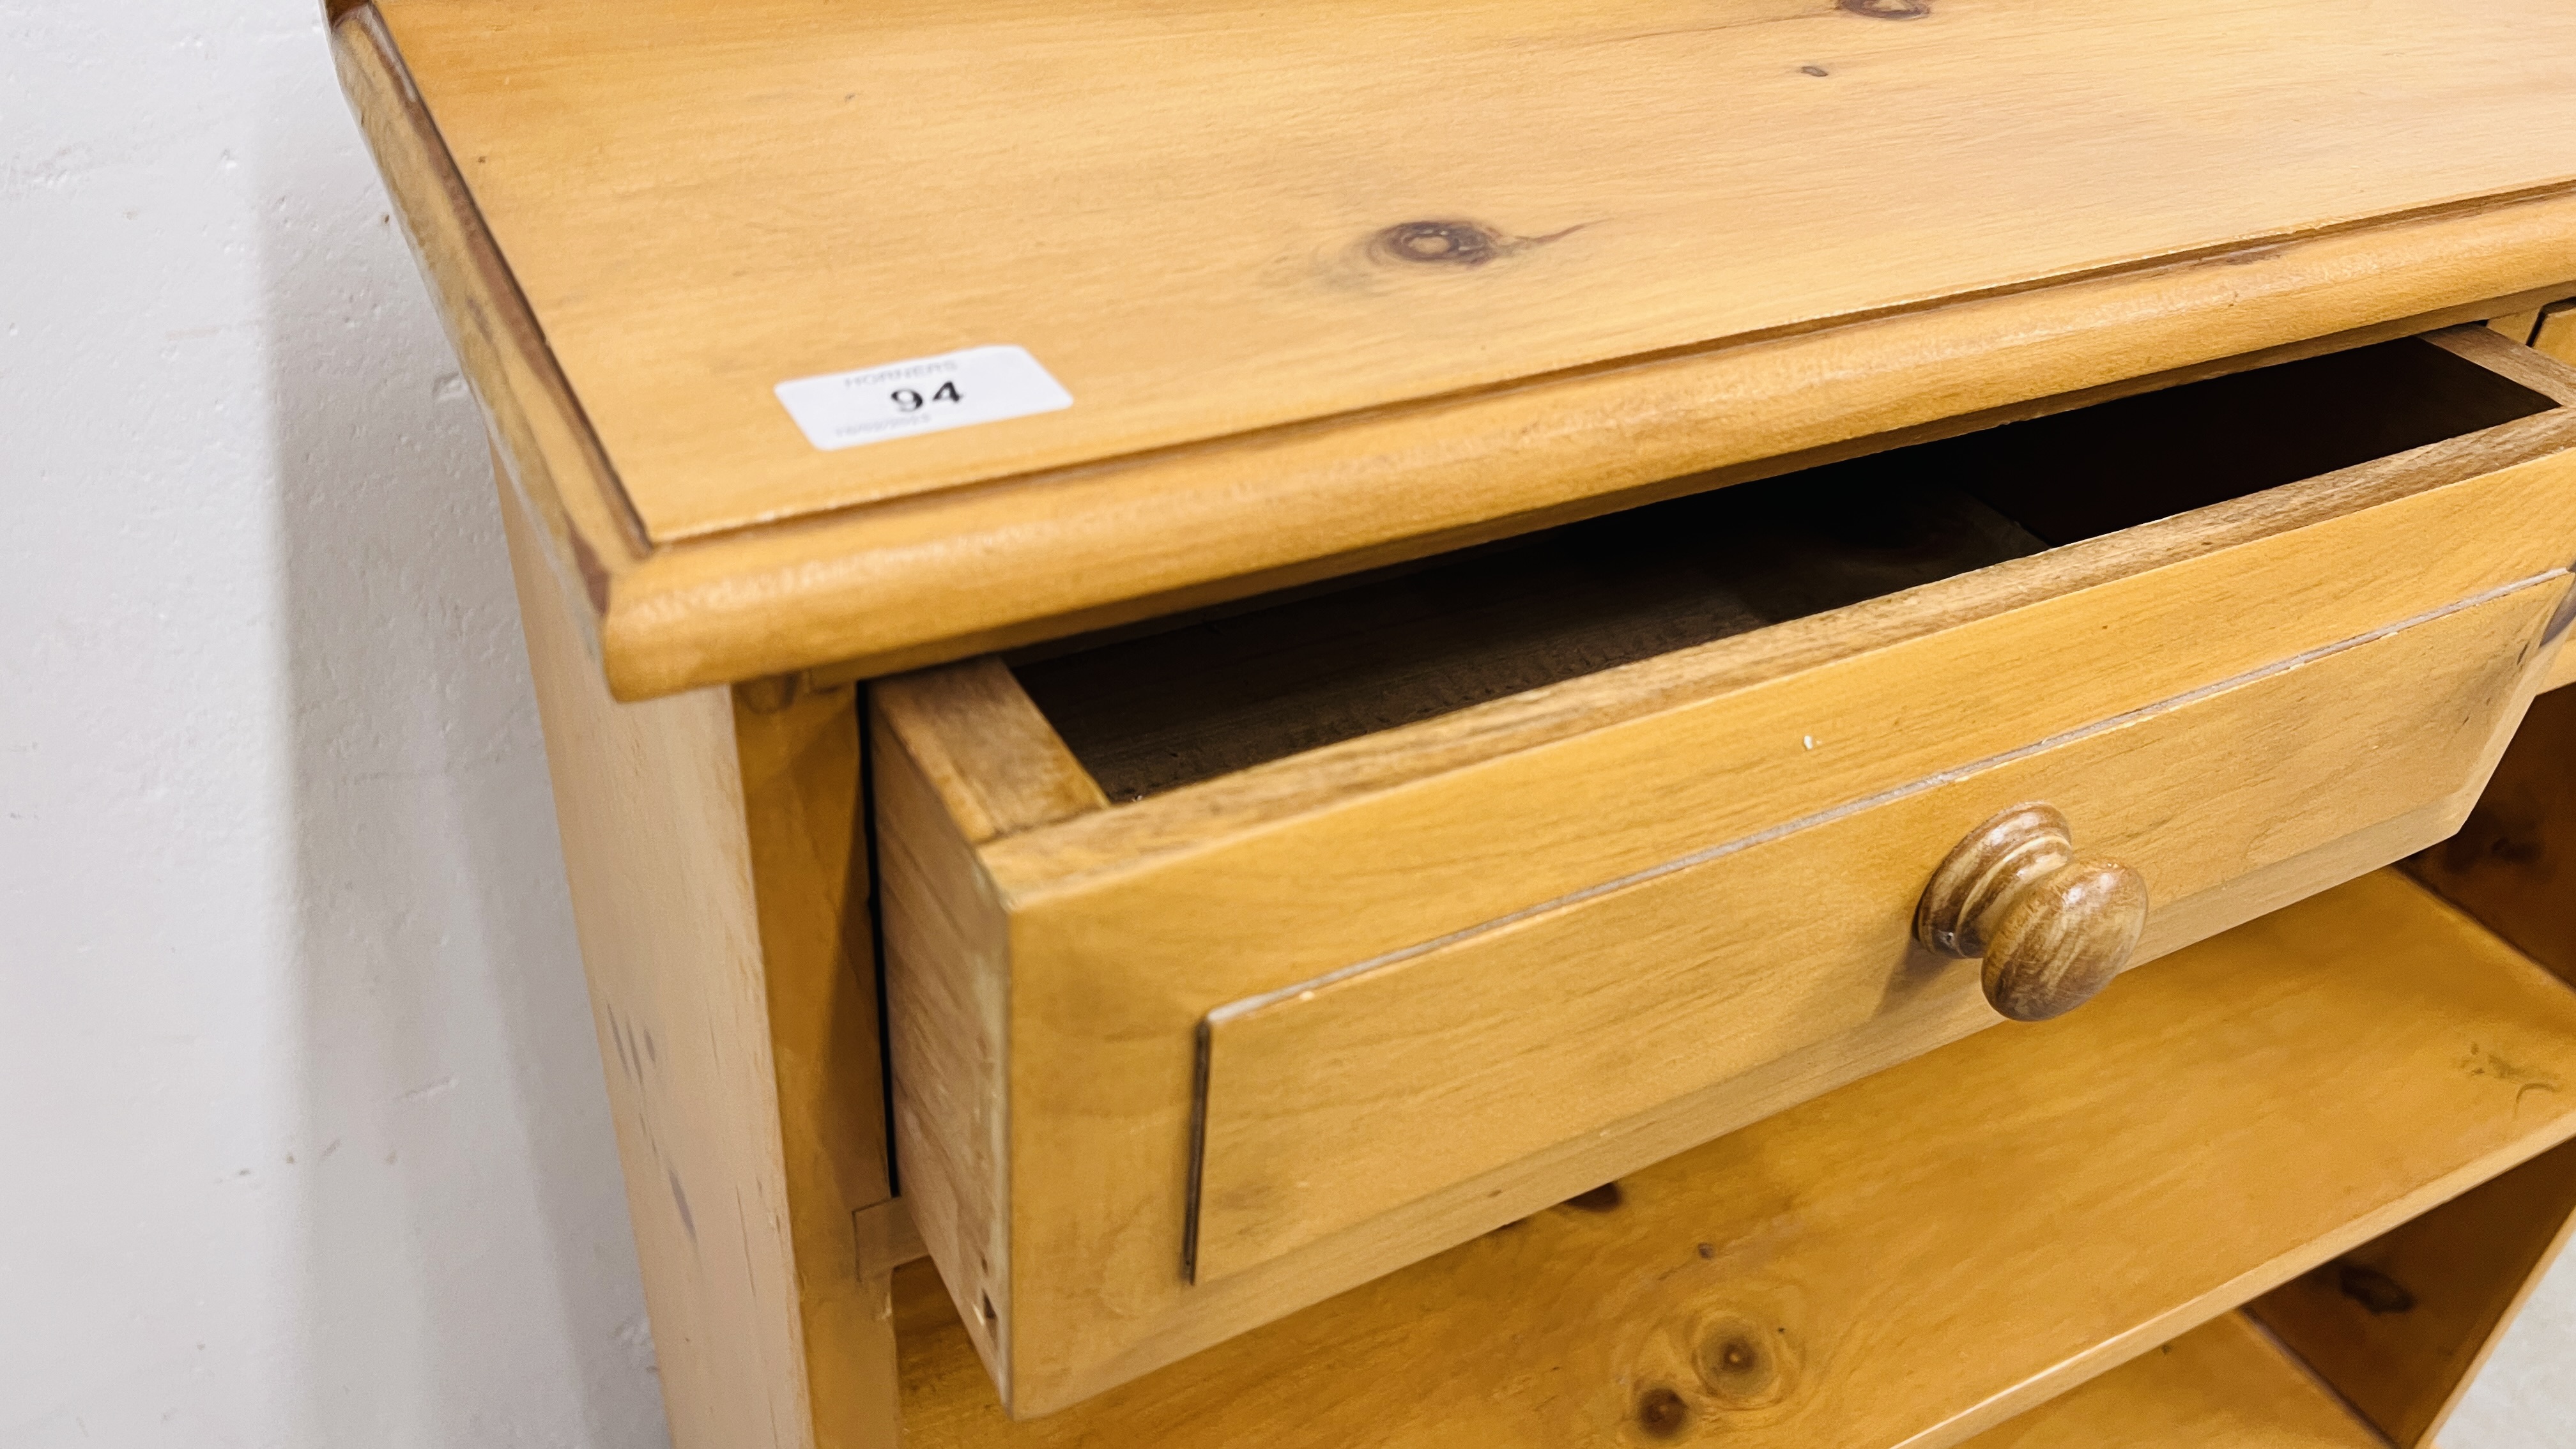 A WAXED PINE TWO TIER BOOKSHELF WITH DRAWERS, W 87CM, D 27CM, H 88CM. - Image 8 of 8